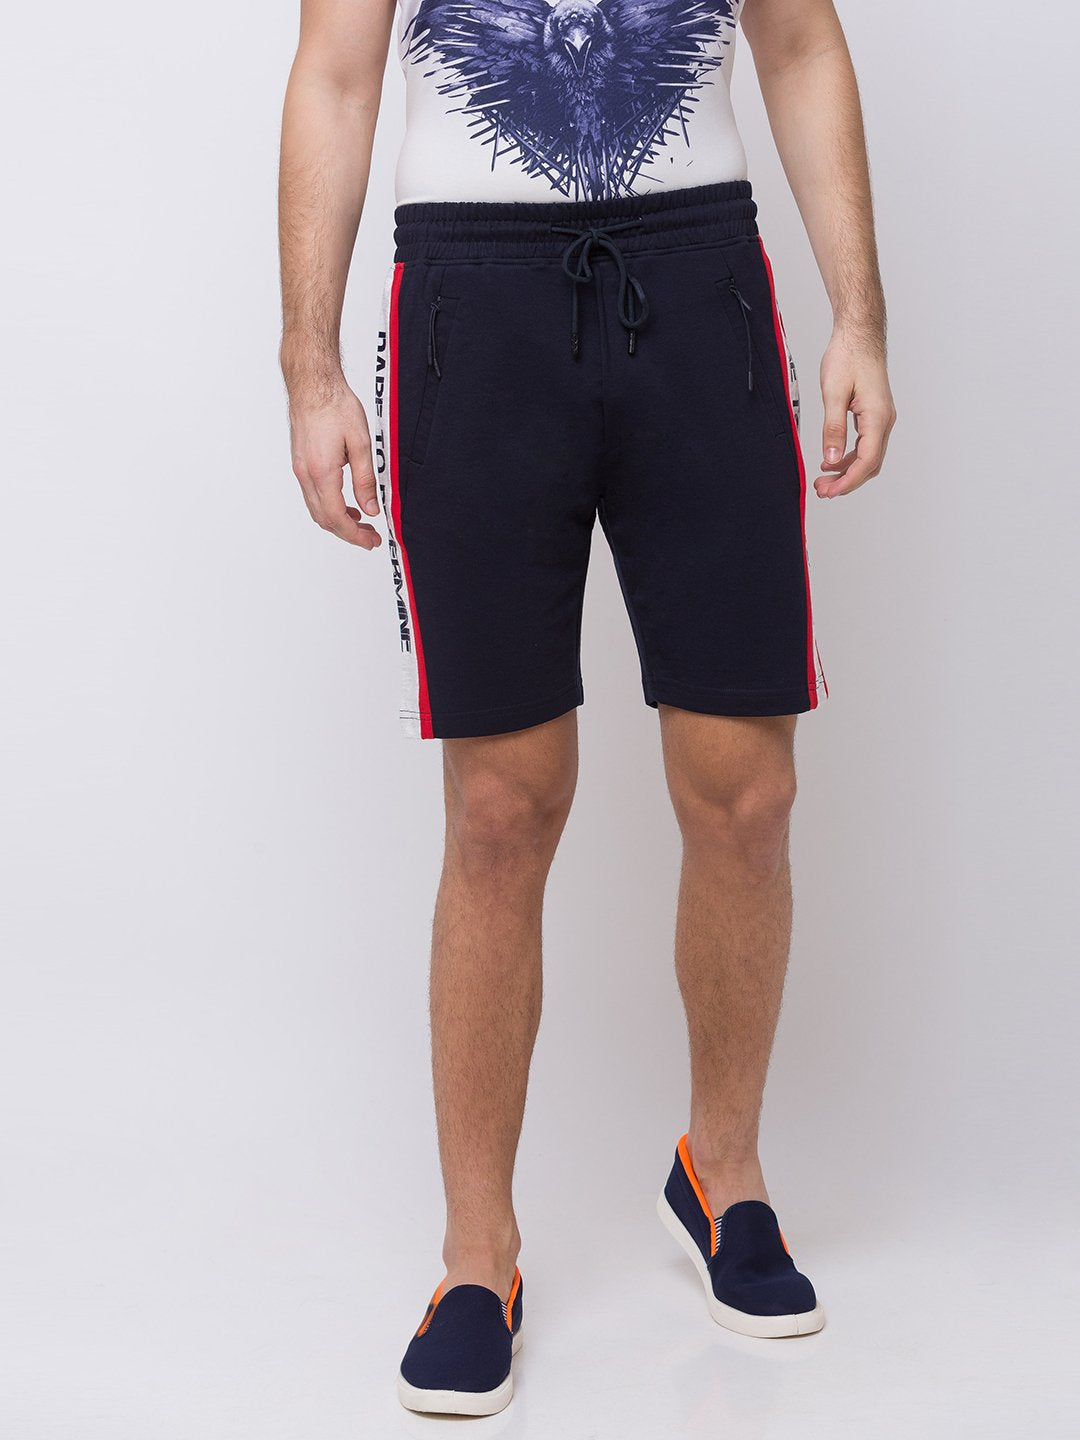 Status Quo |Navy Printed Kintted Shorts - M, L, XL, XXL